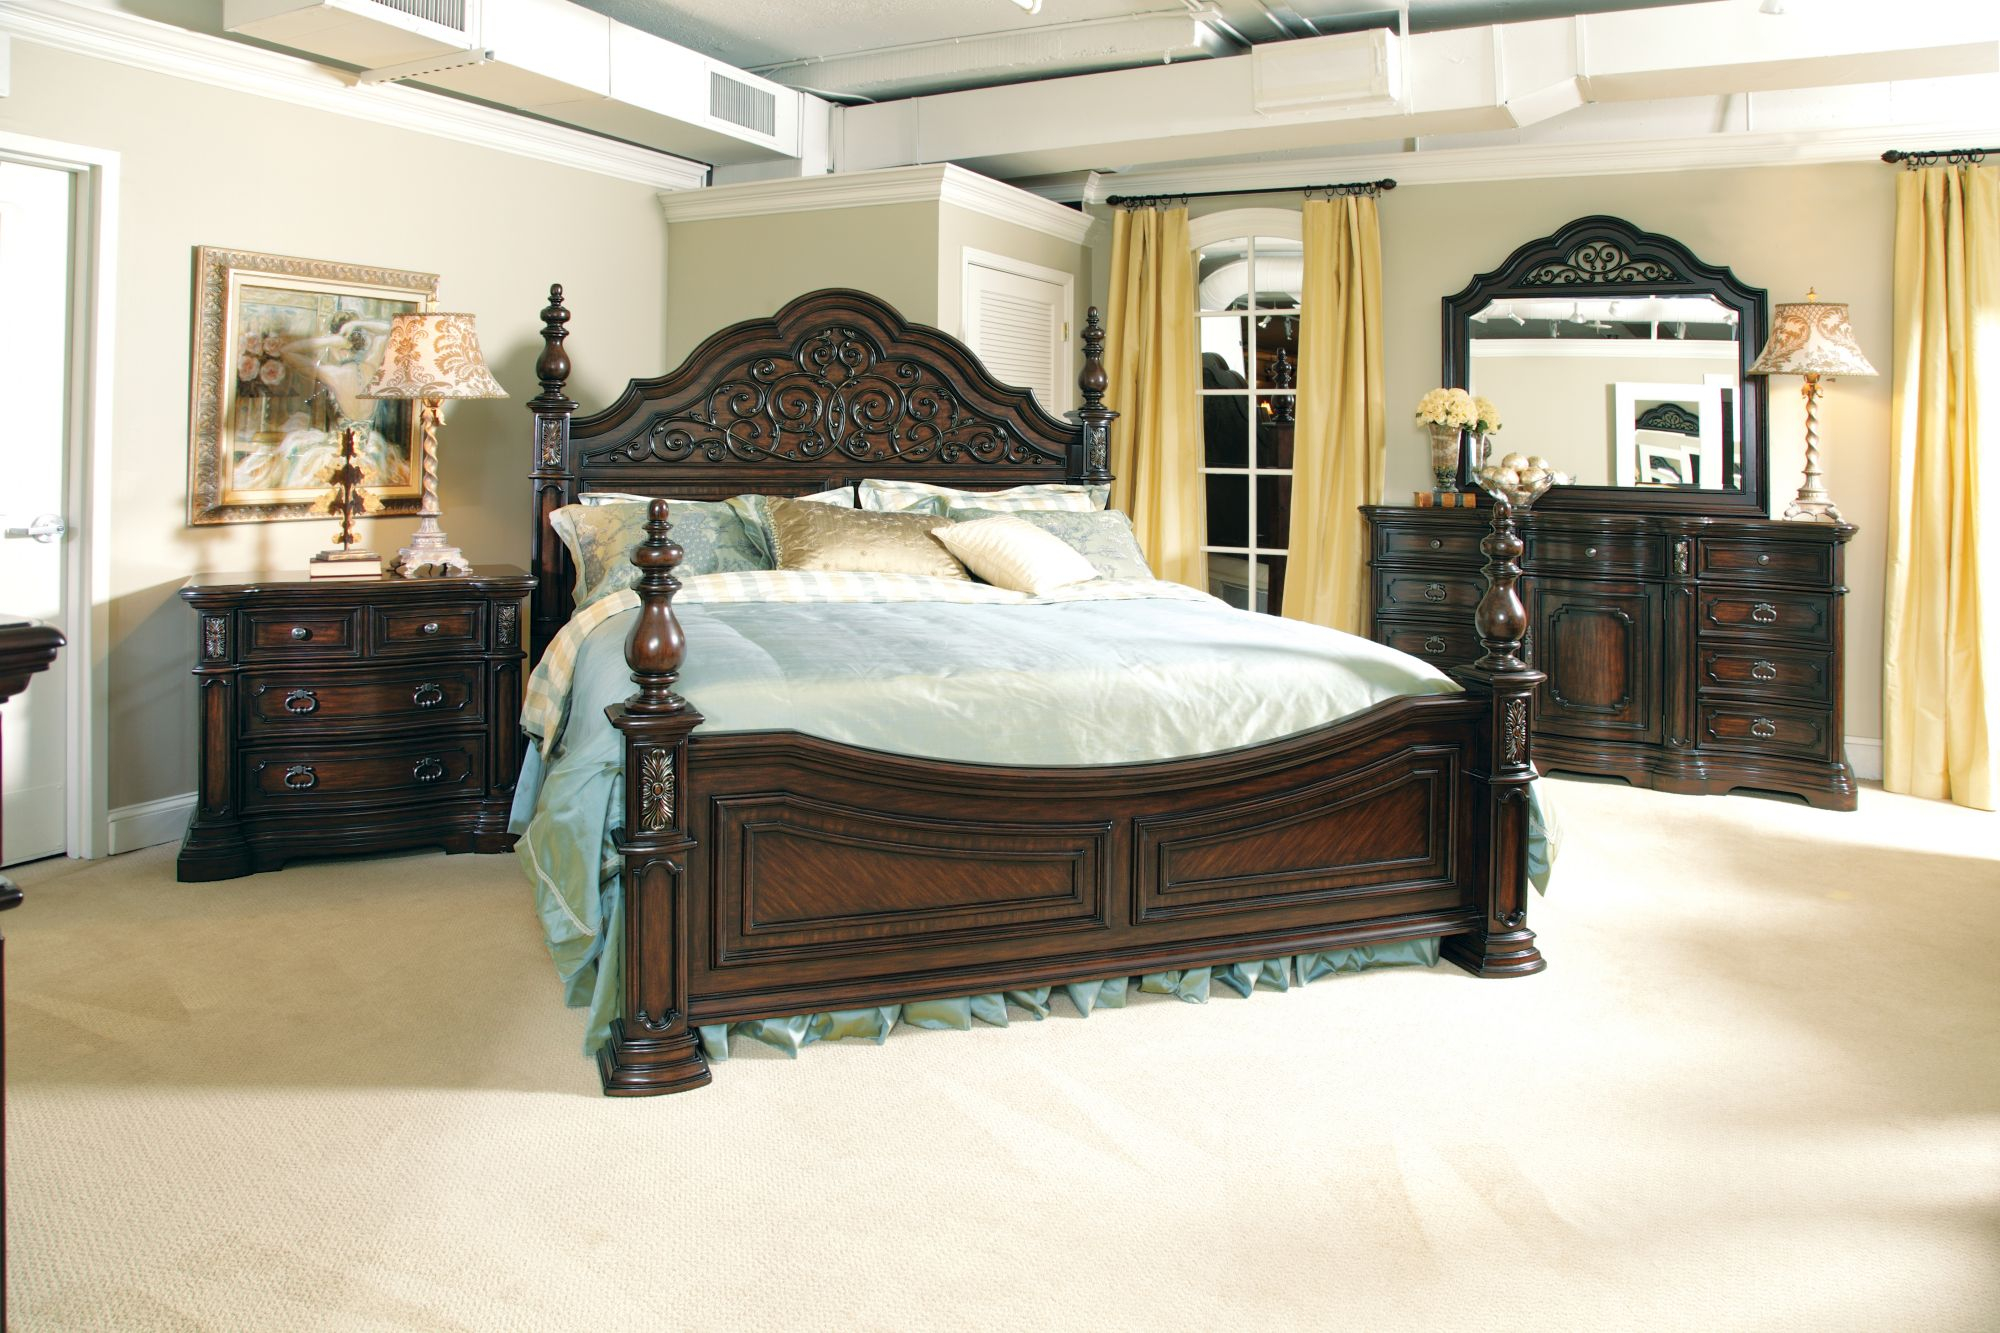 Discontinued Pulaski Bedroom Sets Ln98 Roccommunity throughout dimensions 2000 X 1333